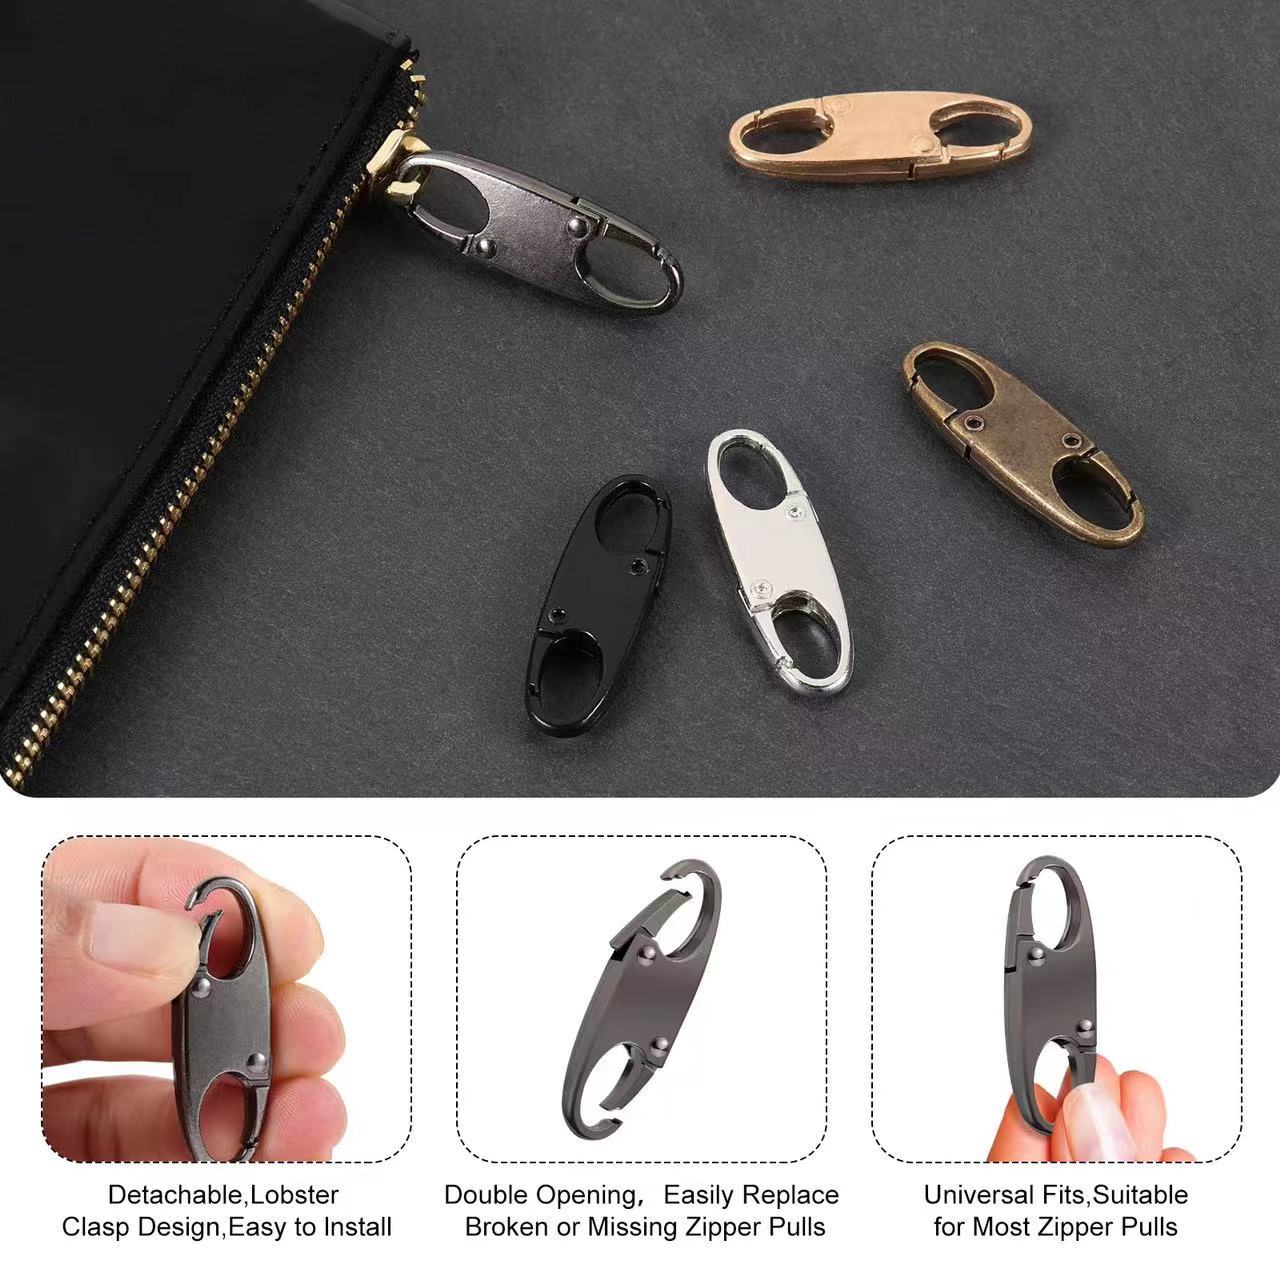 S-Type Spring Fastener Hanger Key Bag Chain-Strap Metal Alloy Climbing Button Carabiner Mini Horoscope Buckle Adjustable Buckle